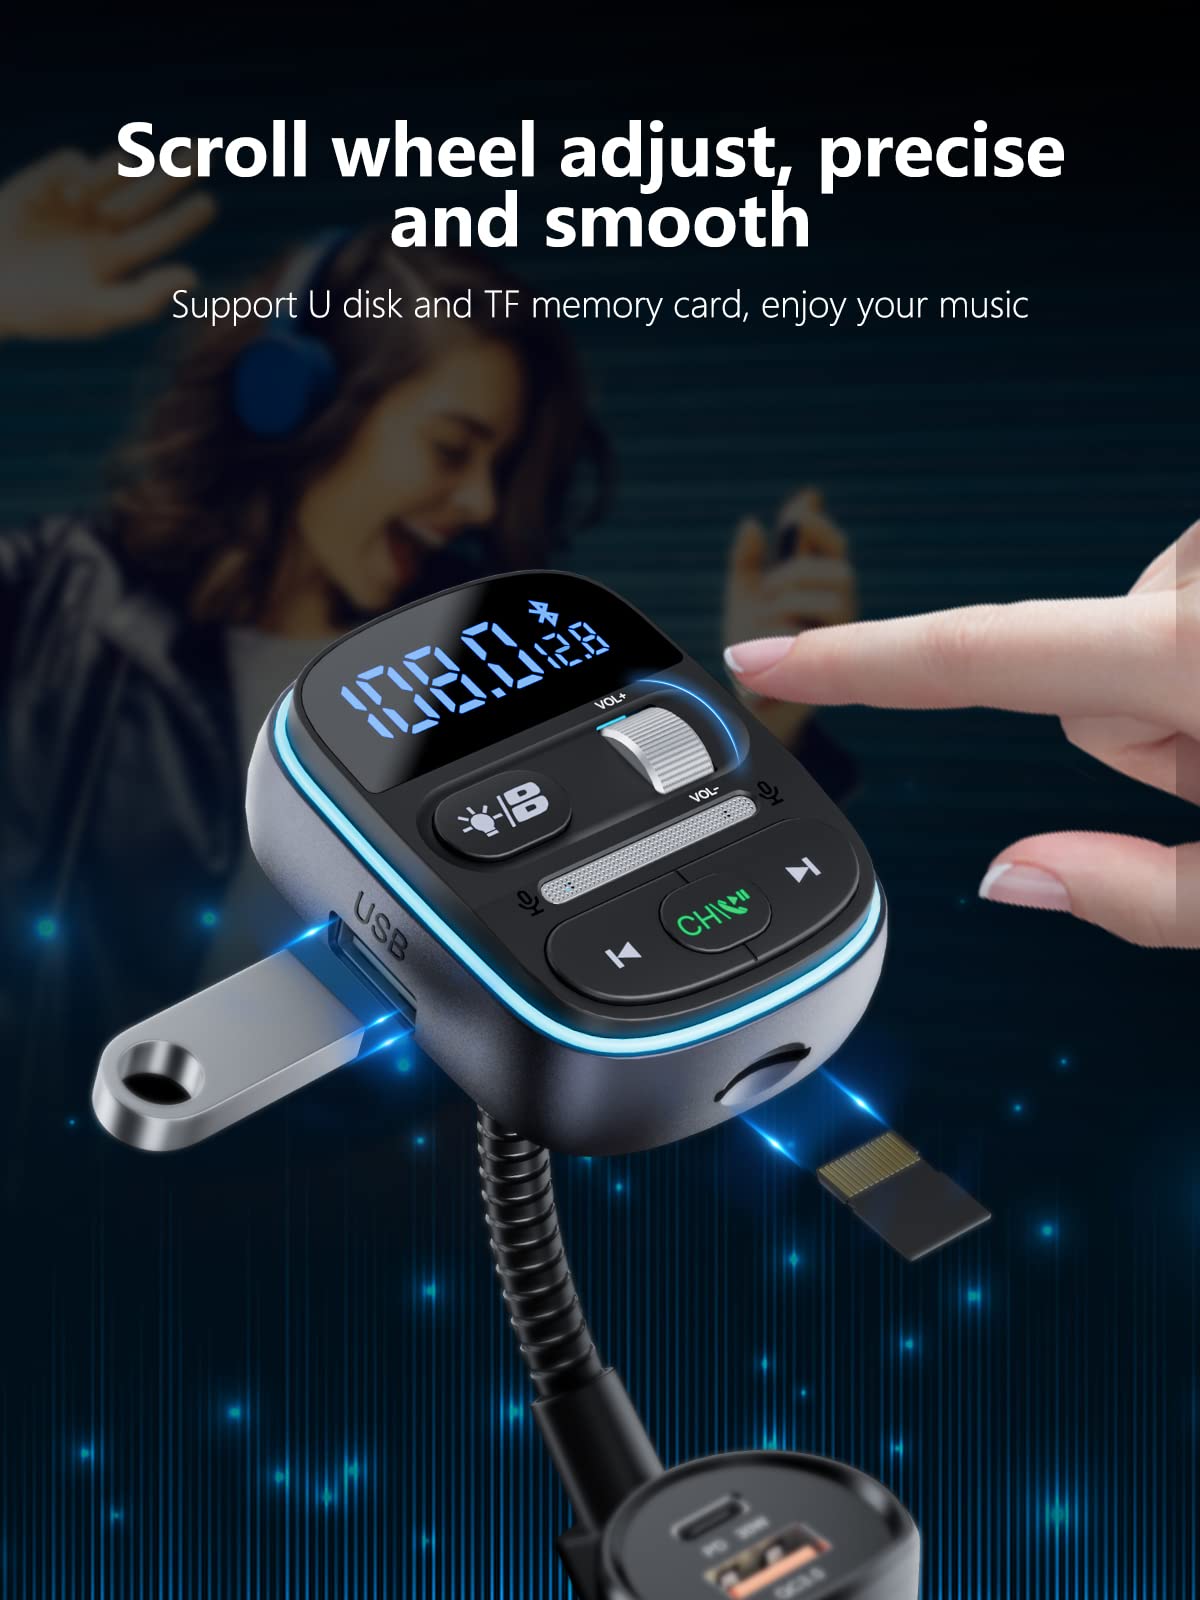 LENCENT PD 30W Bluetooth FM Transmitter,Bluetooth car Adapter with QC3.0 Fast Charger,Hi-Fi Music/Clear Calling car FM Bluetooth Adapter,【Color Light】